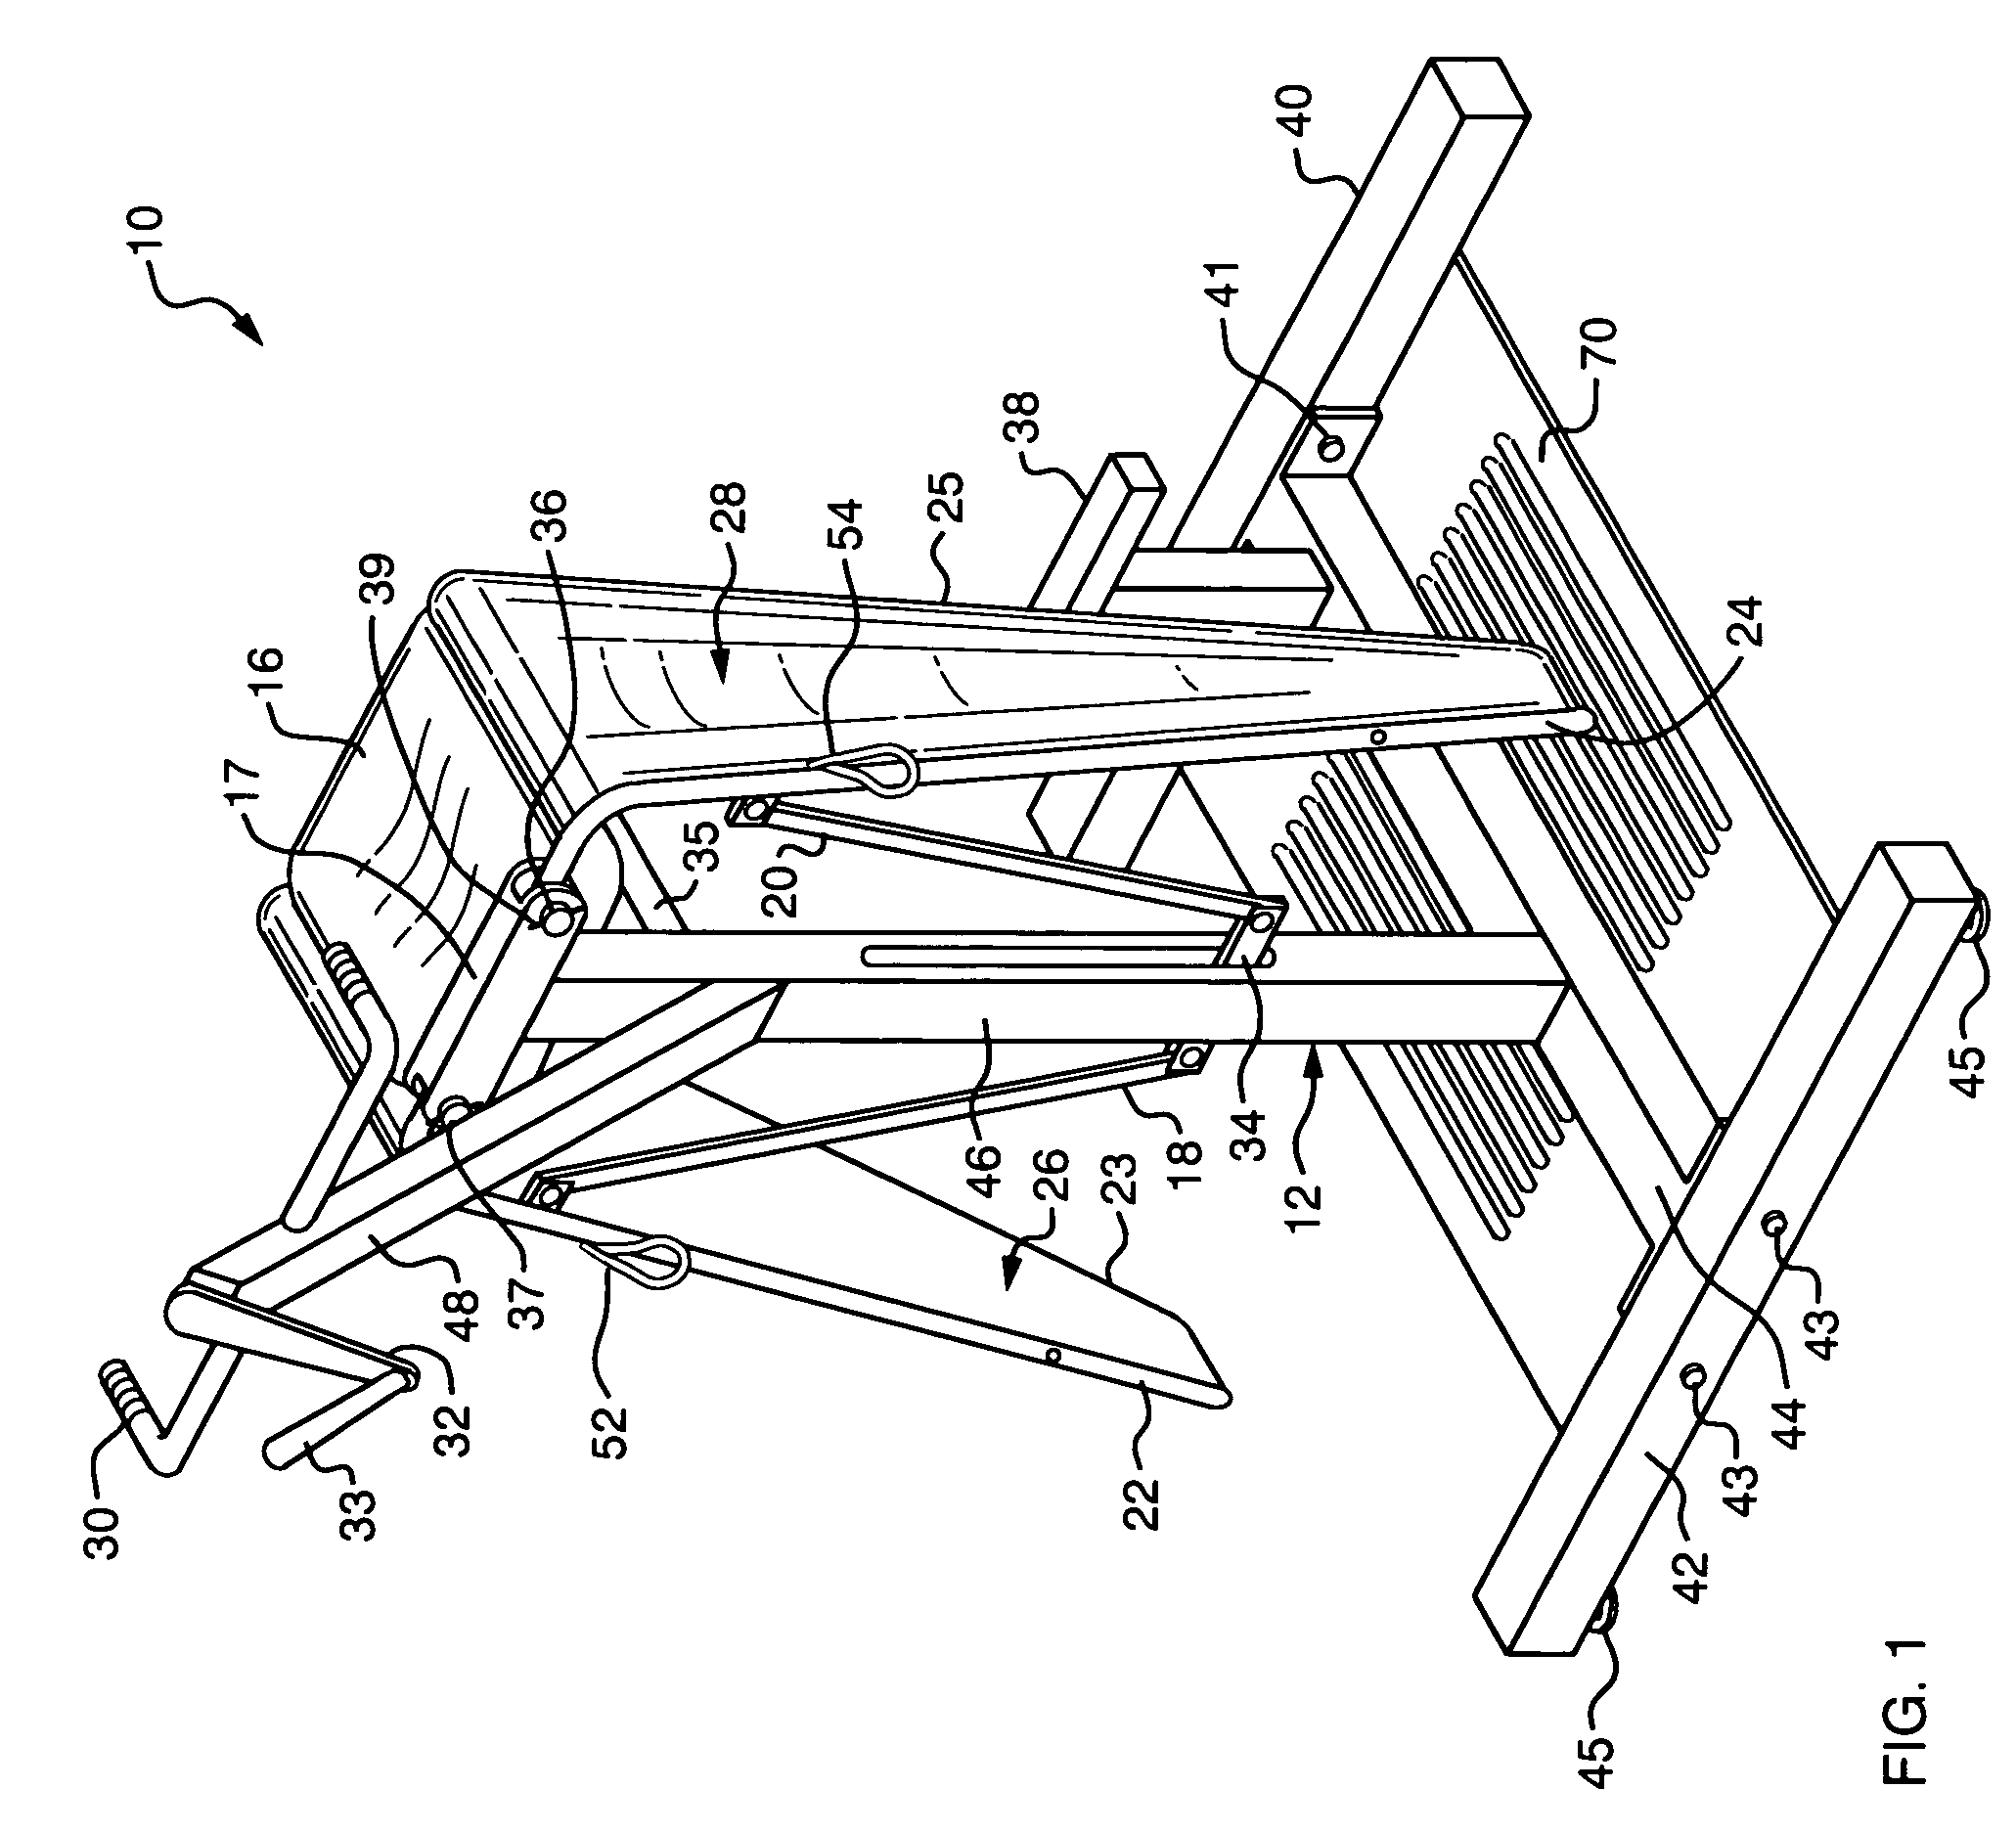 Straddle stretching apparatus